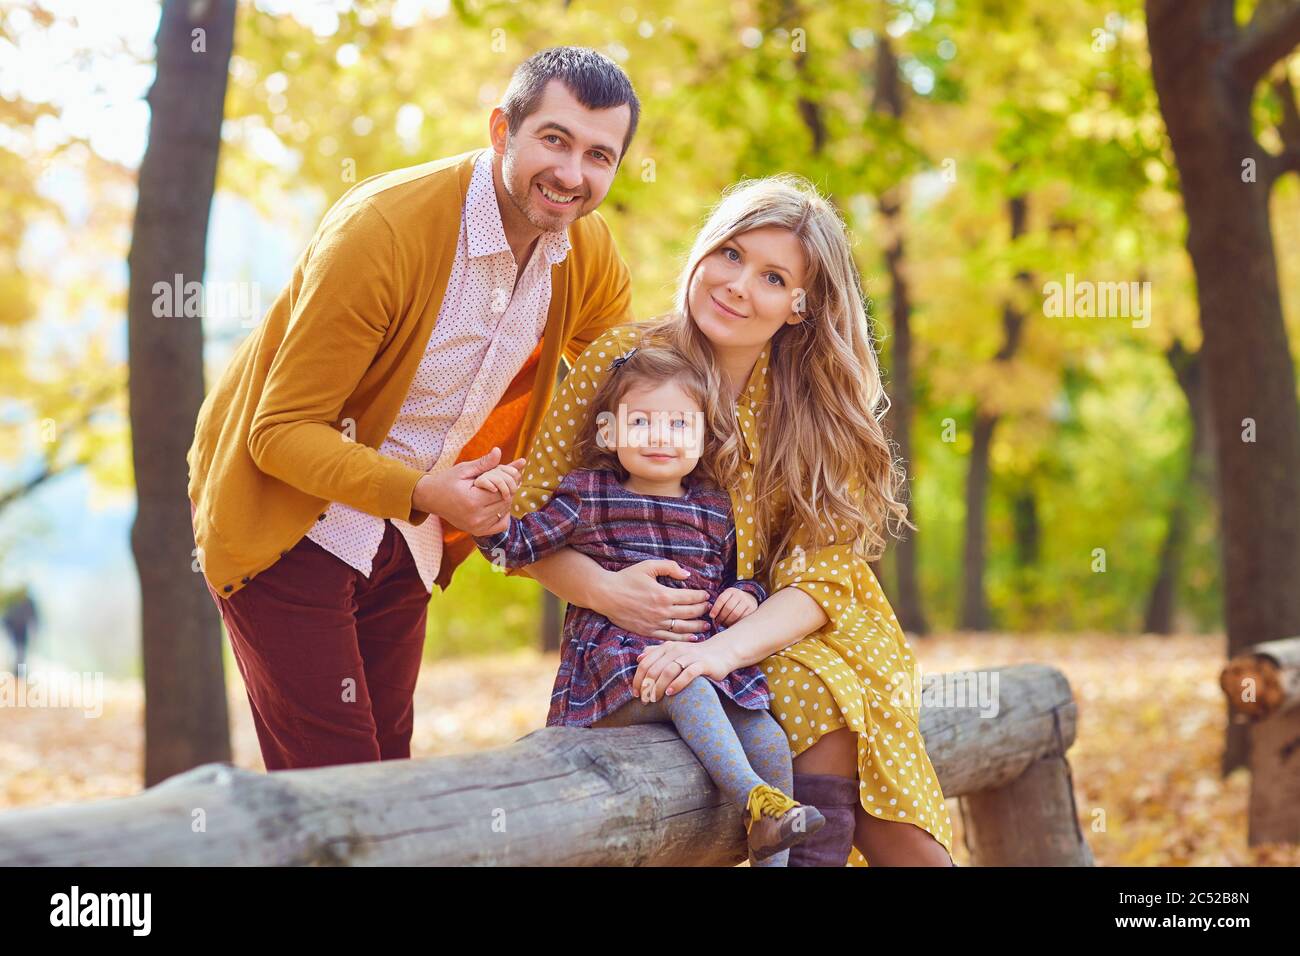 Family playing with baby in the park in autumn. Stock Photo